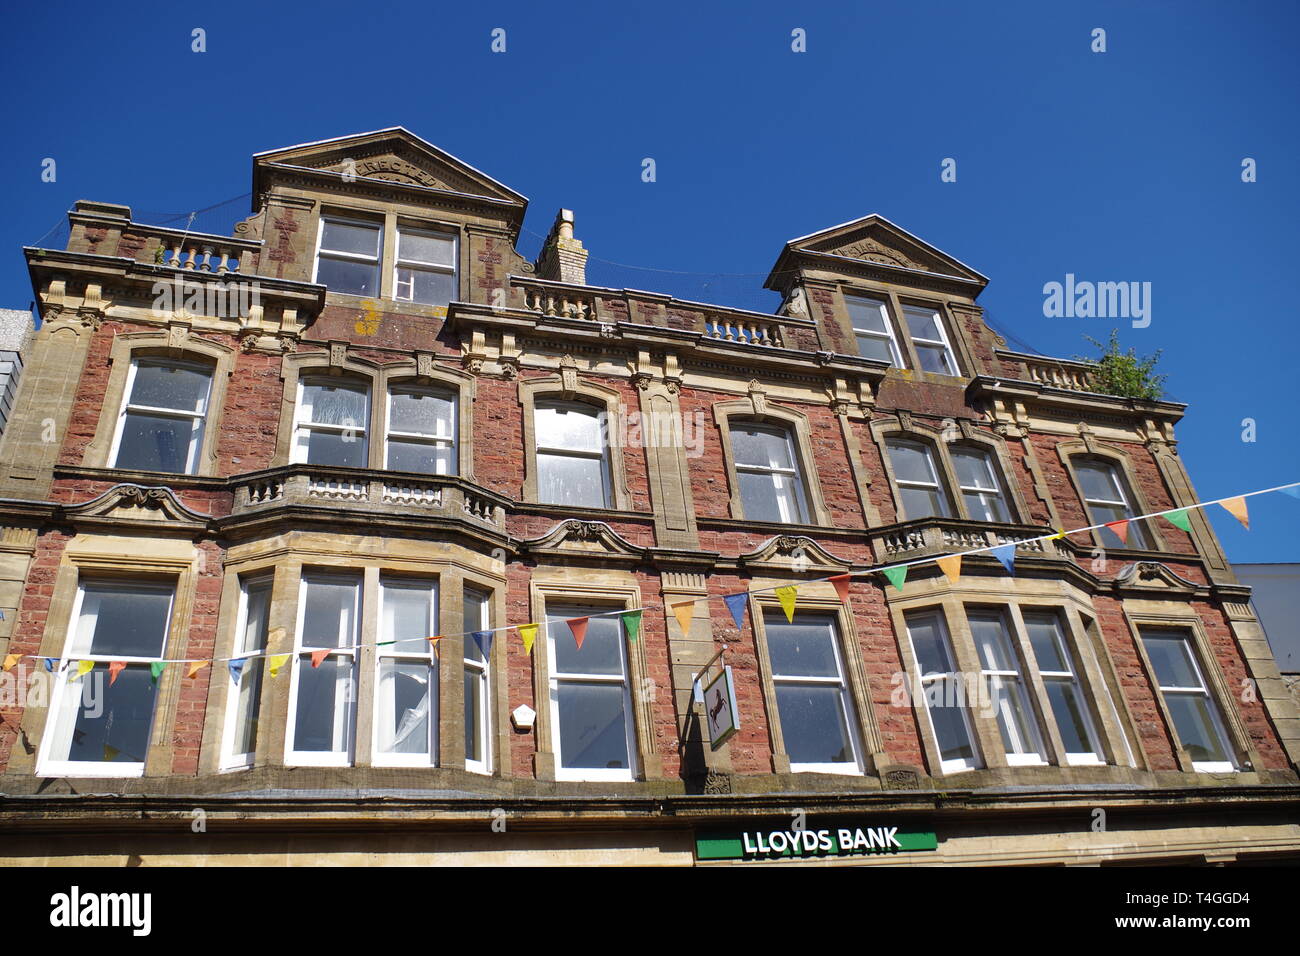 Lloyds Bank, 65 Fore Street, Kingsbridge, Devon, UK. Elegant Victorian Stone Building with Festive Bunting on a Summers Day. Stock Photo